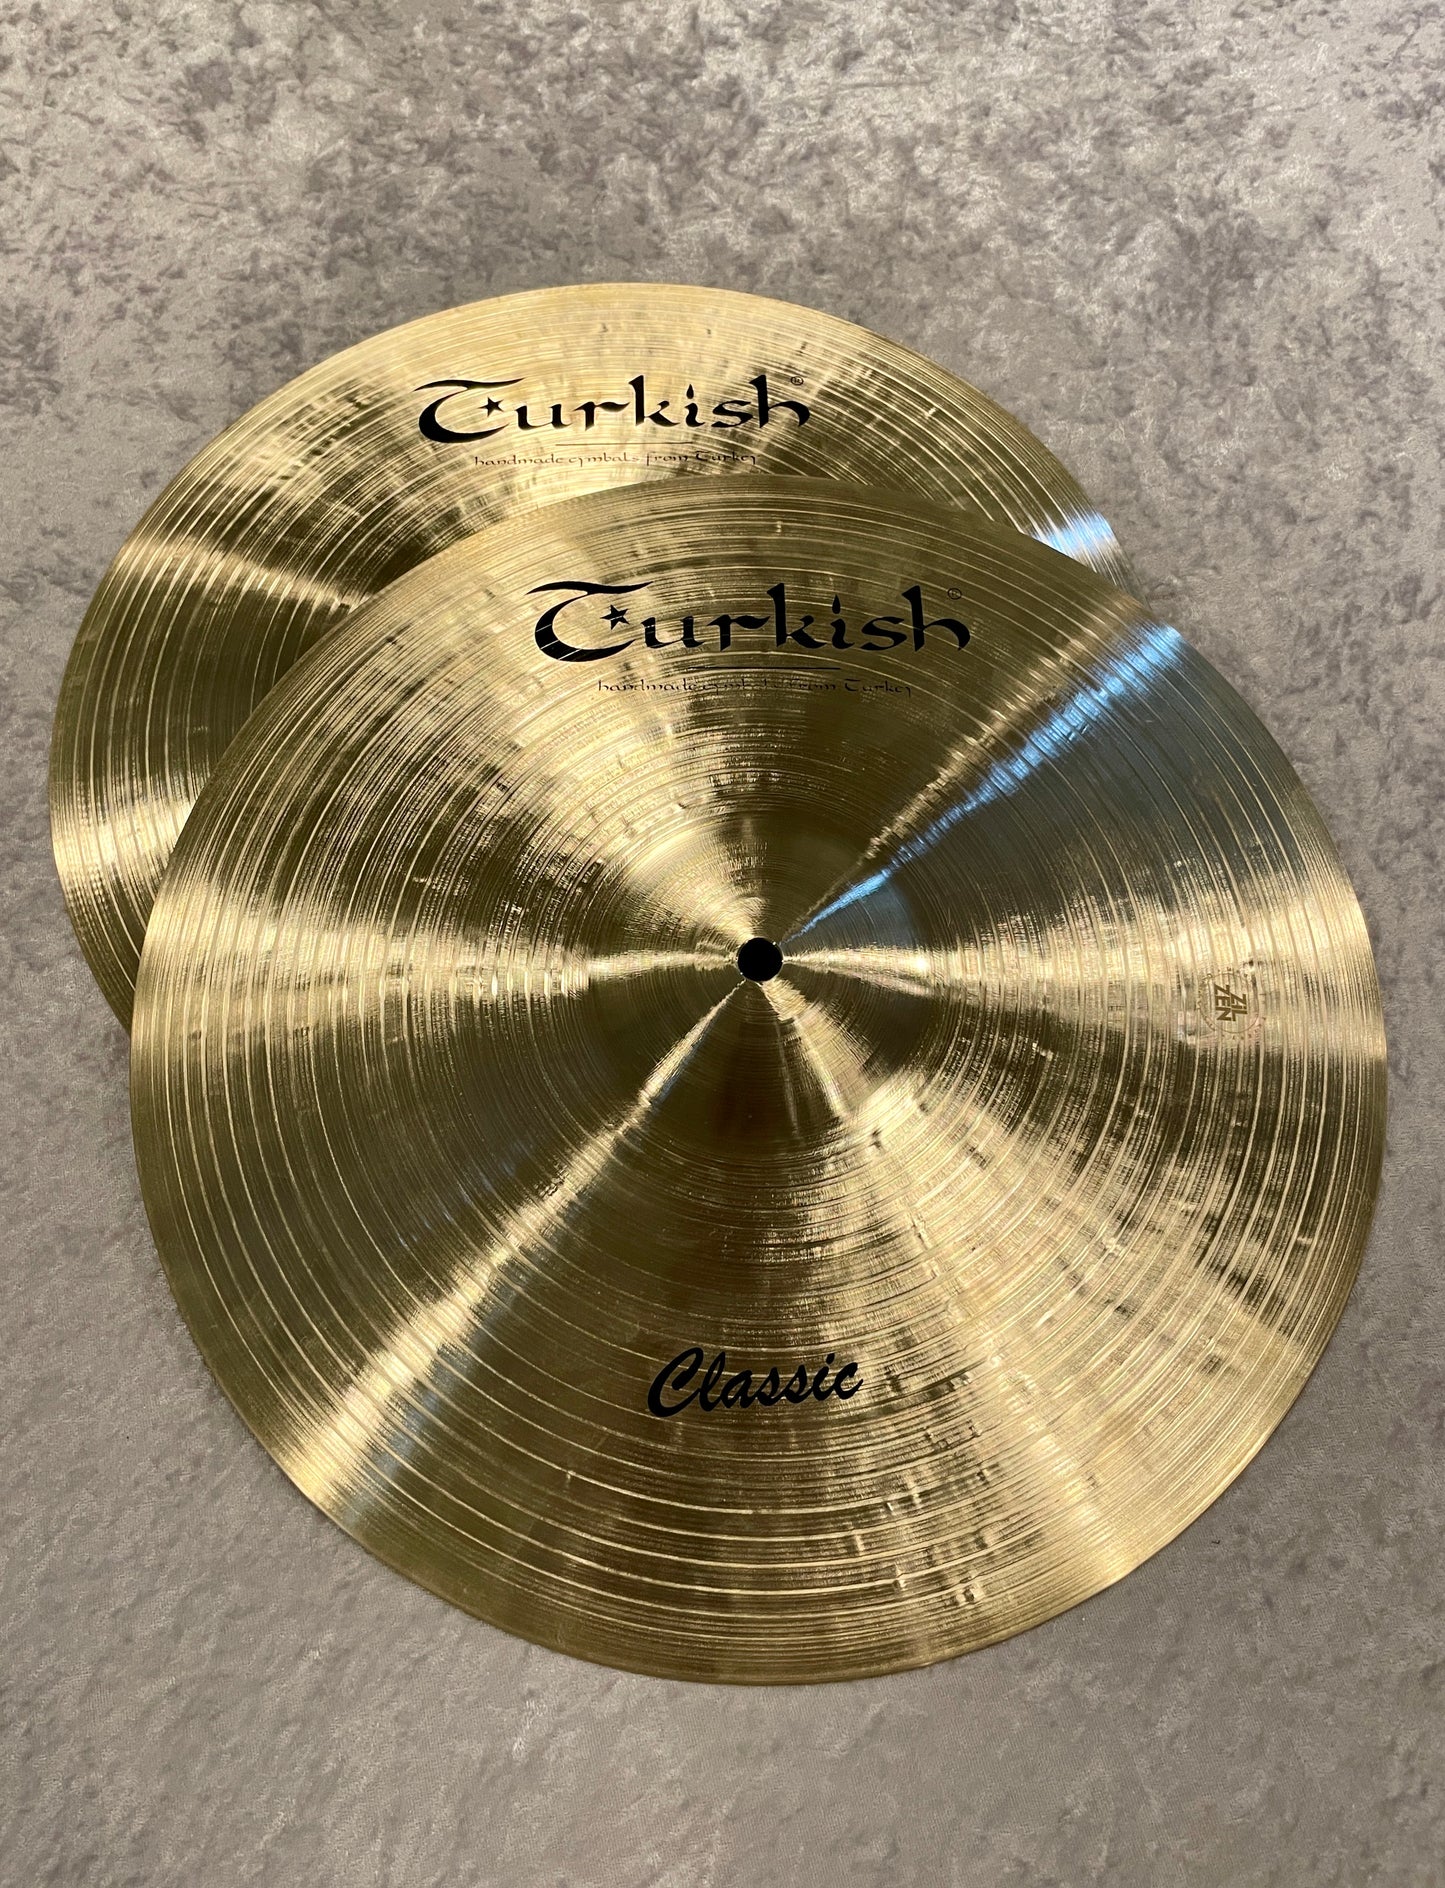 15" Turkish Cymbals Classic Series Hi-Hat Cymbal Pair 1226/1438g *Sound File*